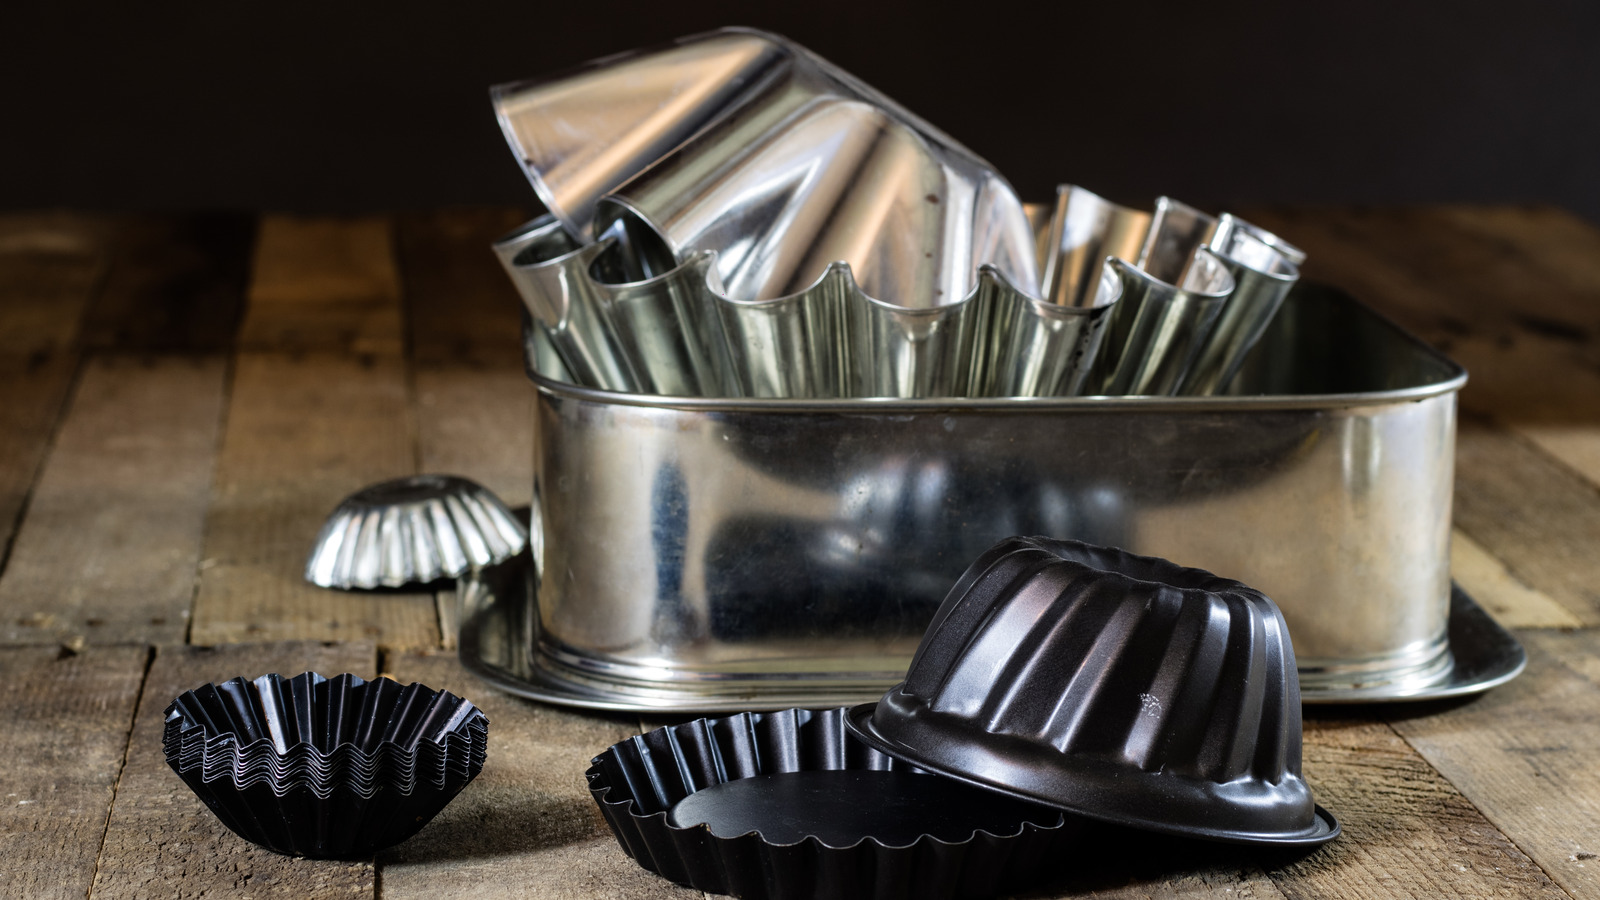 Rust Prevention: How to Prevent and Remove Rust Stains in Metal Bakeware